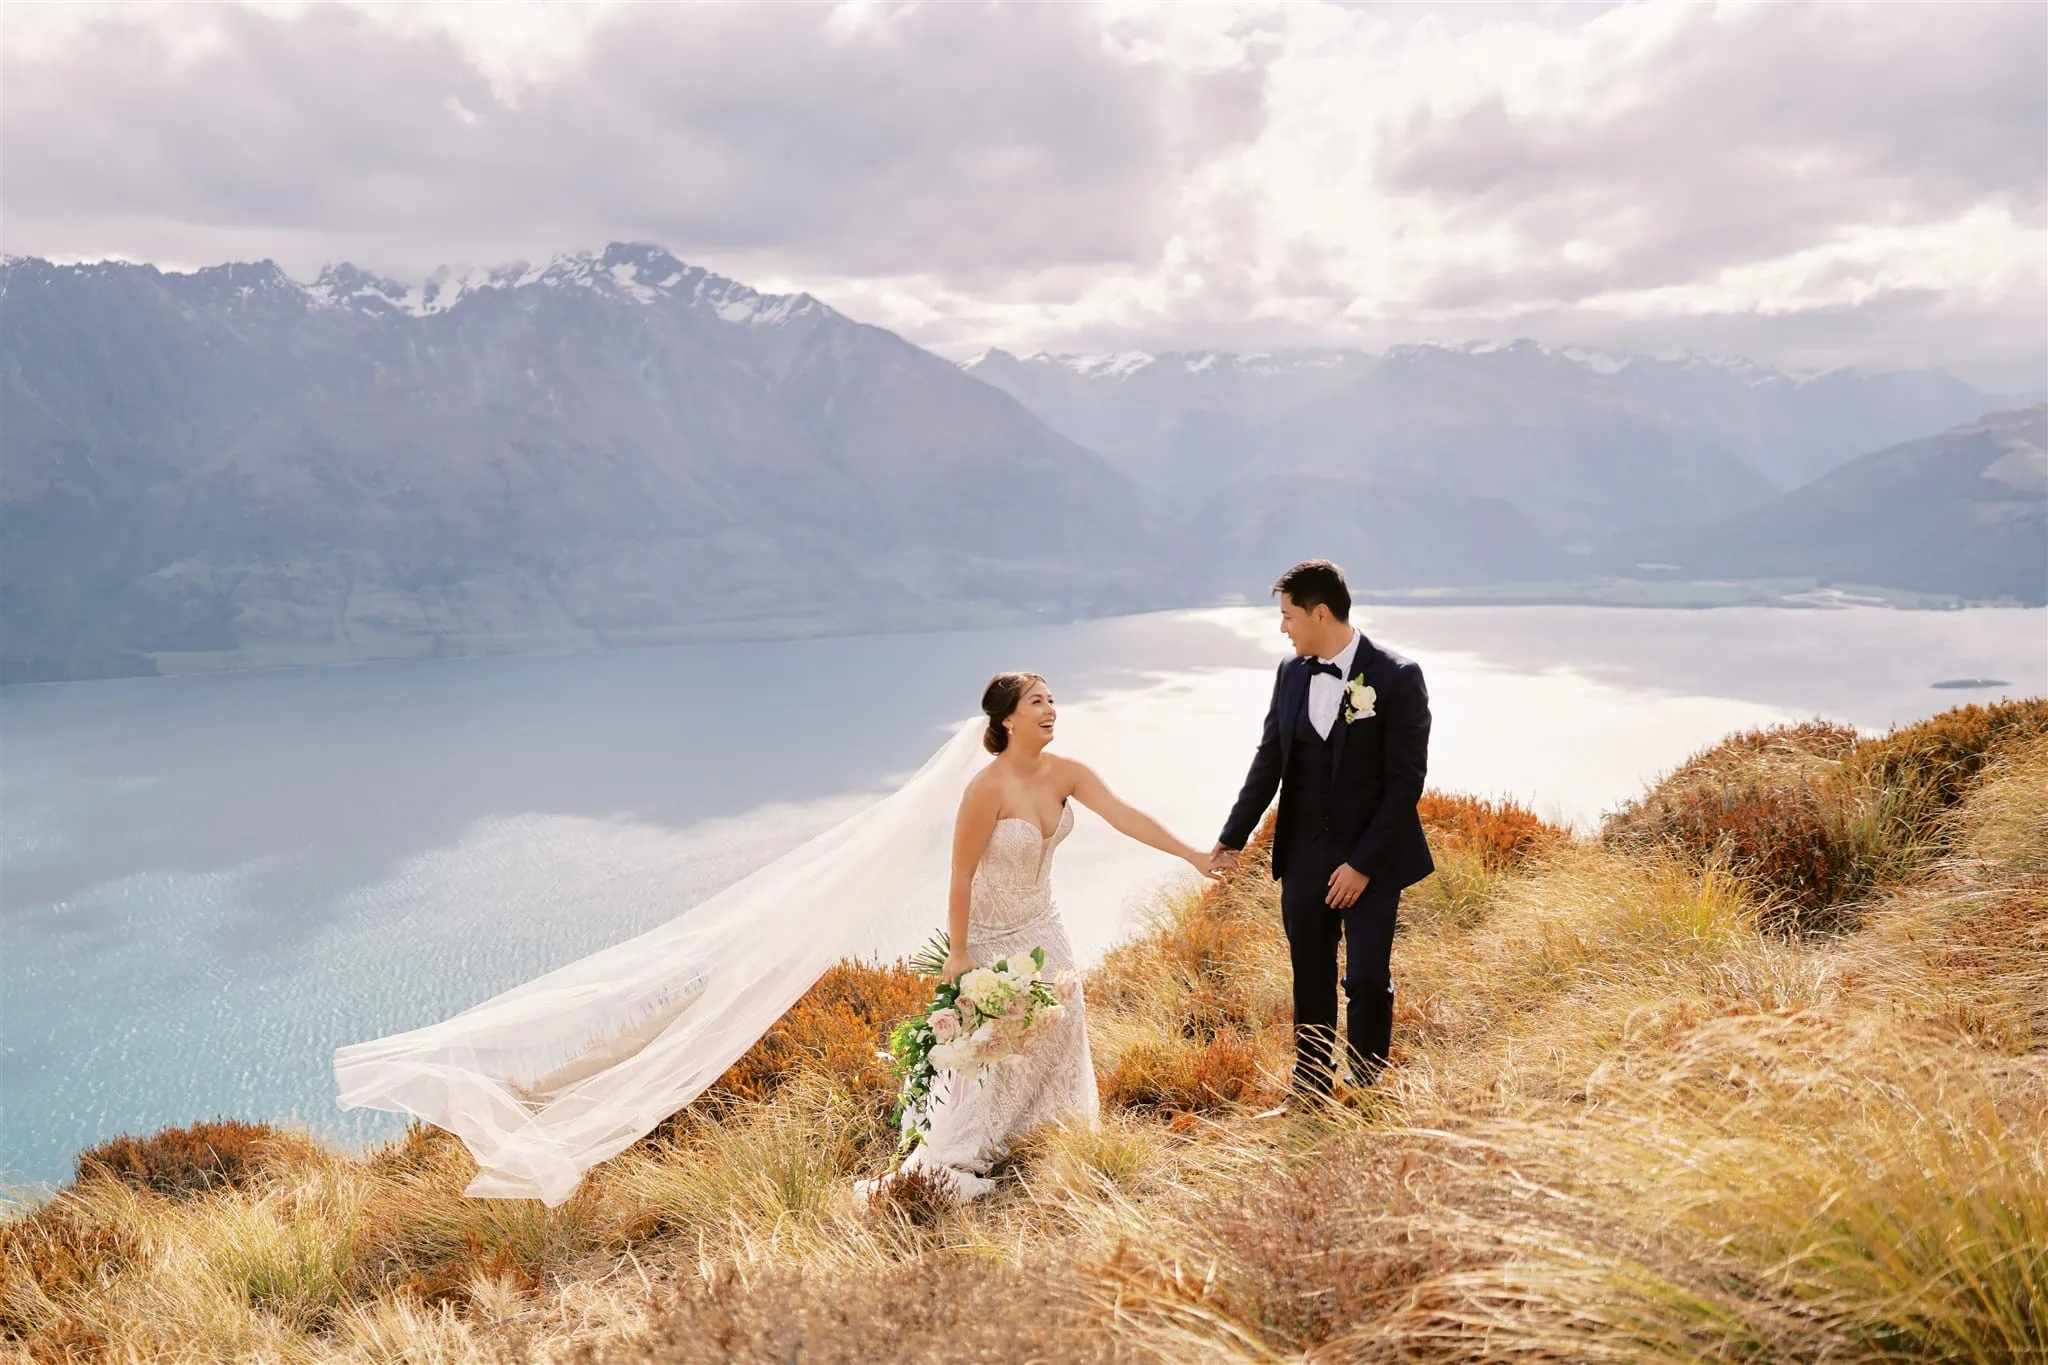 Queenstown Elopement Heli Wedding Photographer クイーンズタウン結婚式 | Mariah, the bride, and her groom standing on top of a cliff overlooking lake Wanaka in an epic Queenstown setting.